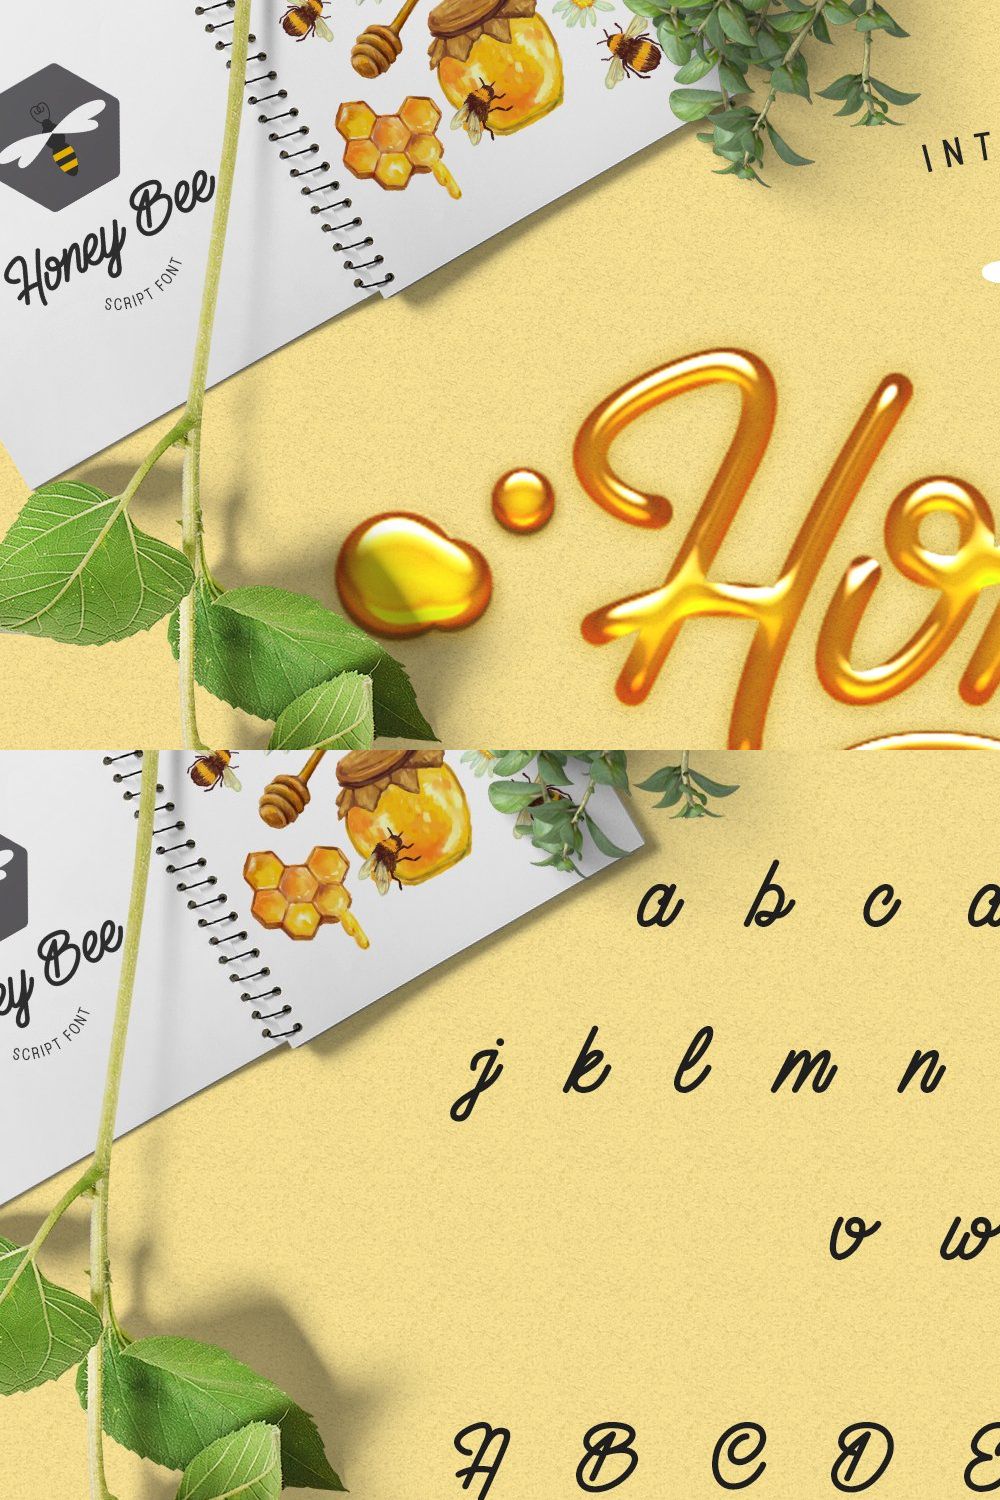 Honey Bee pinterest preview image.